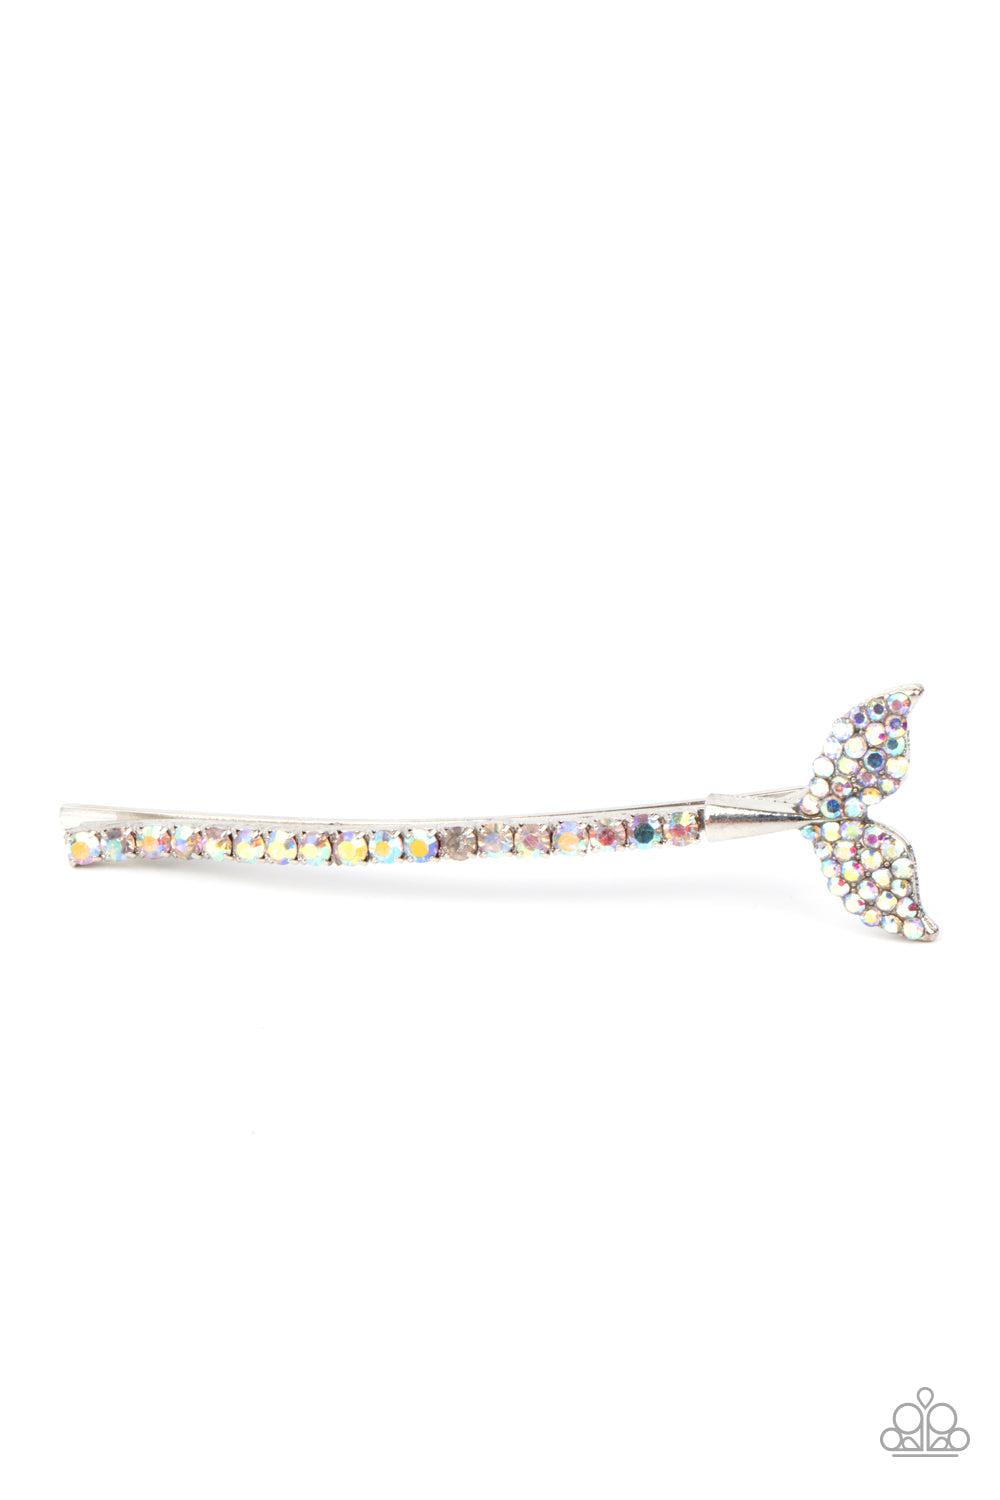 Deep Dive Multi Iridescent Mermaid Tail Hair Pin - Paparazzi Accessories- lightbox - CarasShop.com - $5 Jewelry by Cara Jewels